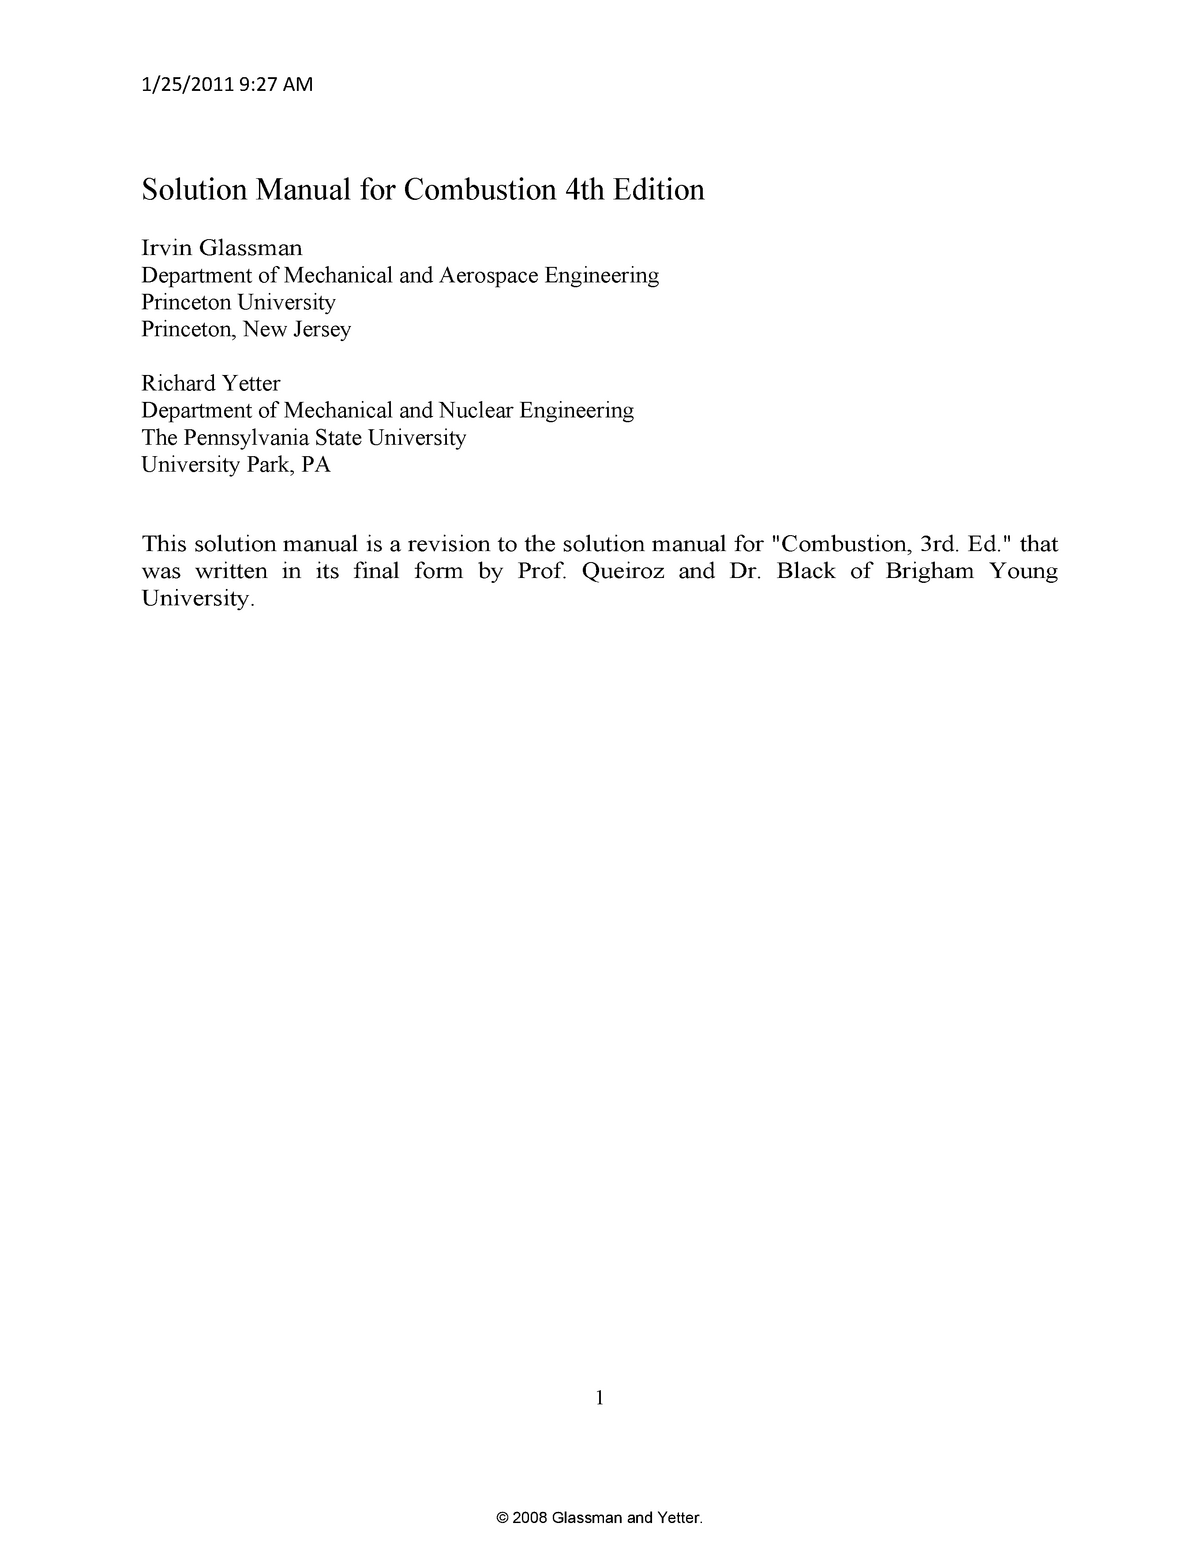 Solution Combustion Ra Mit Solution Manual For Combustion 4th Edition Irvin Glassman Department Of Mechanical And Aerospace Engineering Princeton Studocu